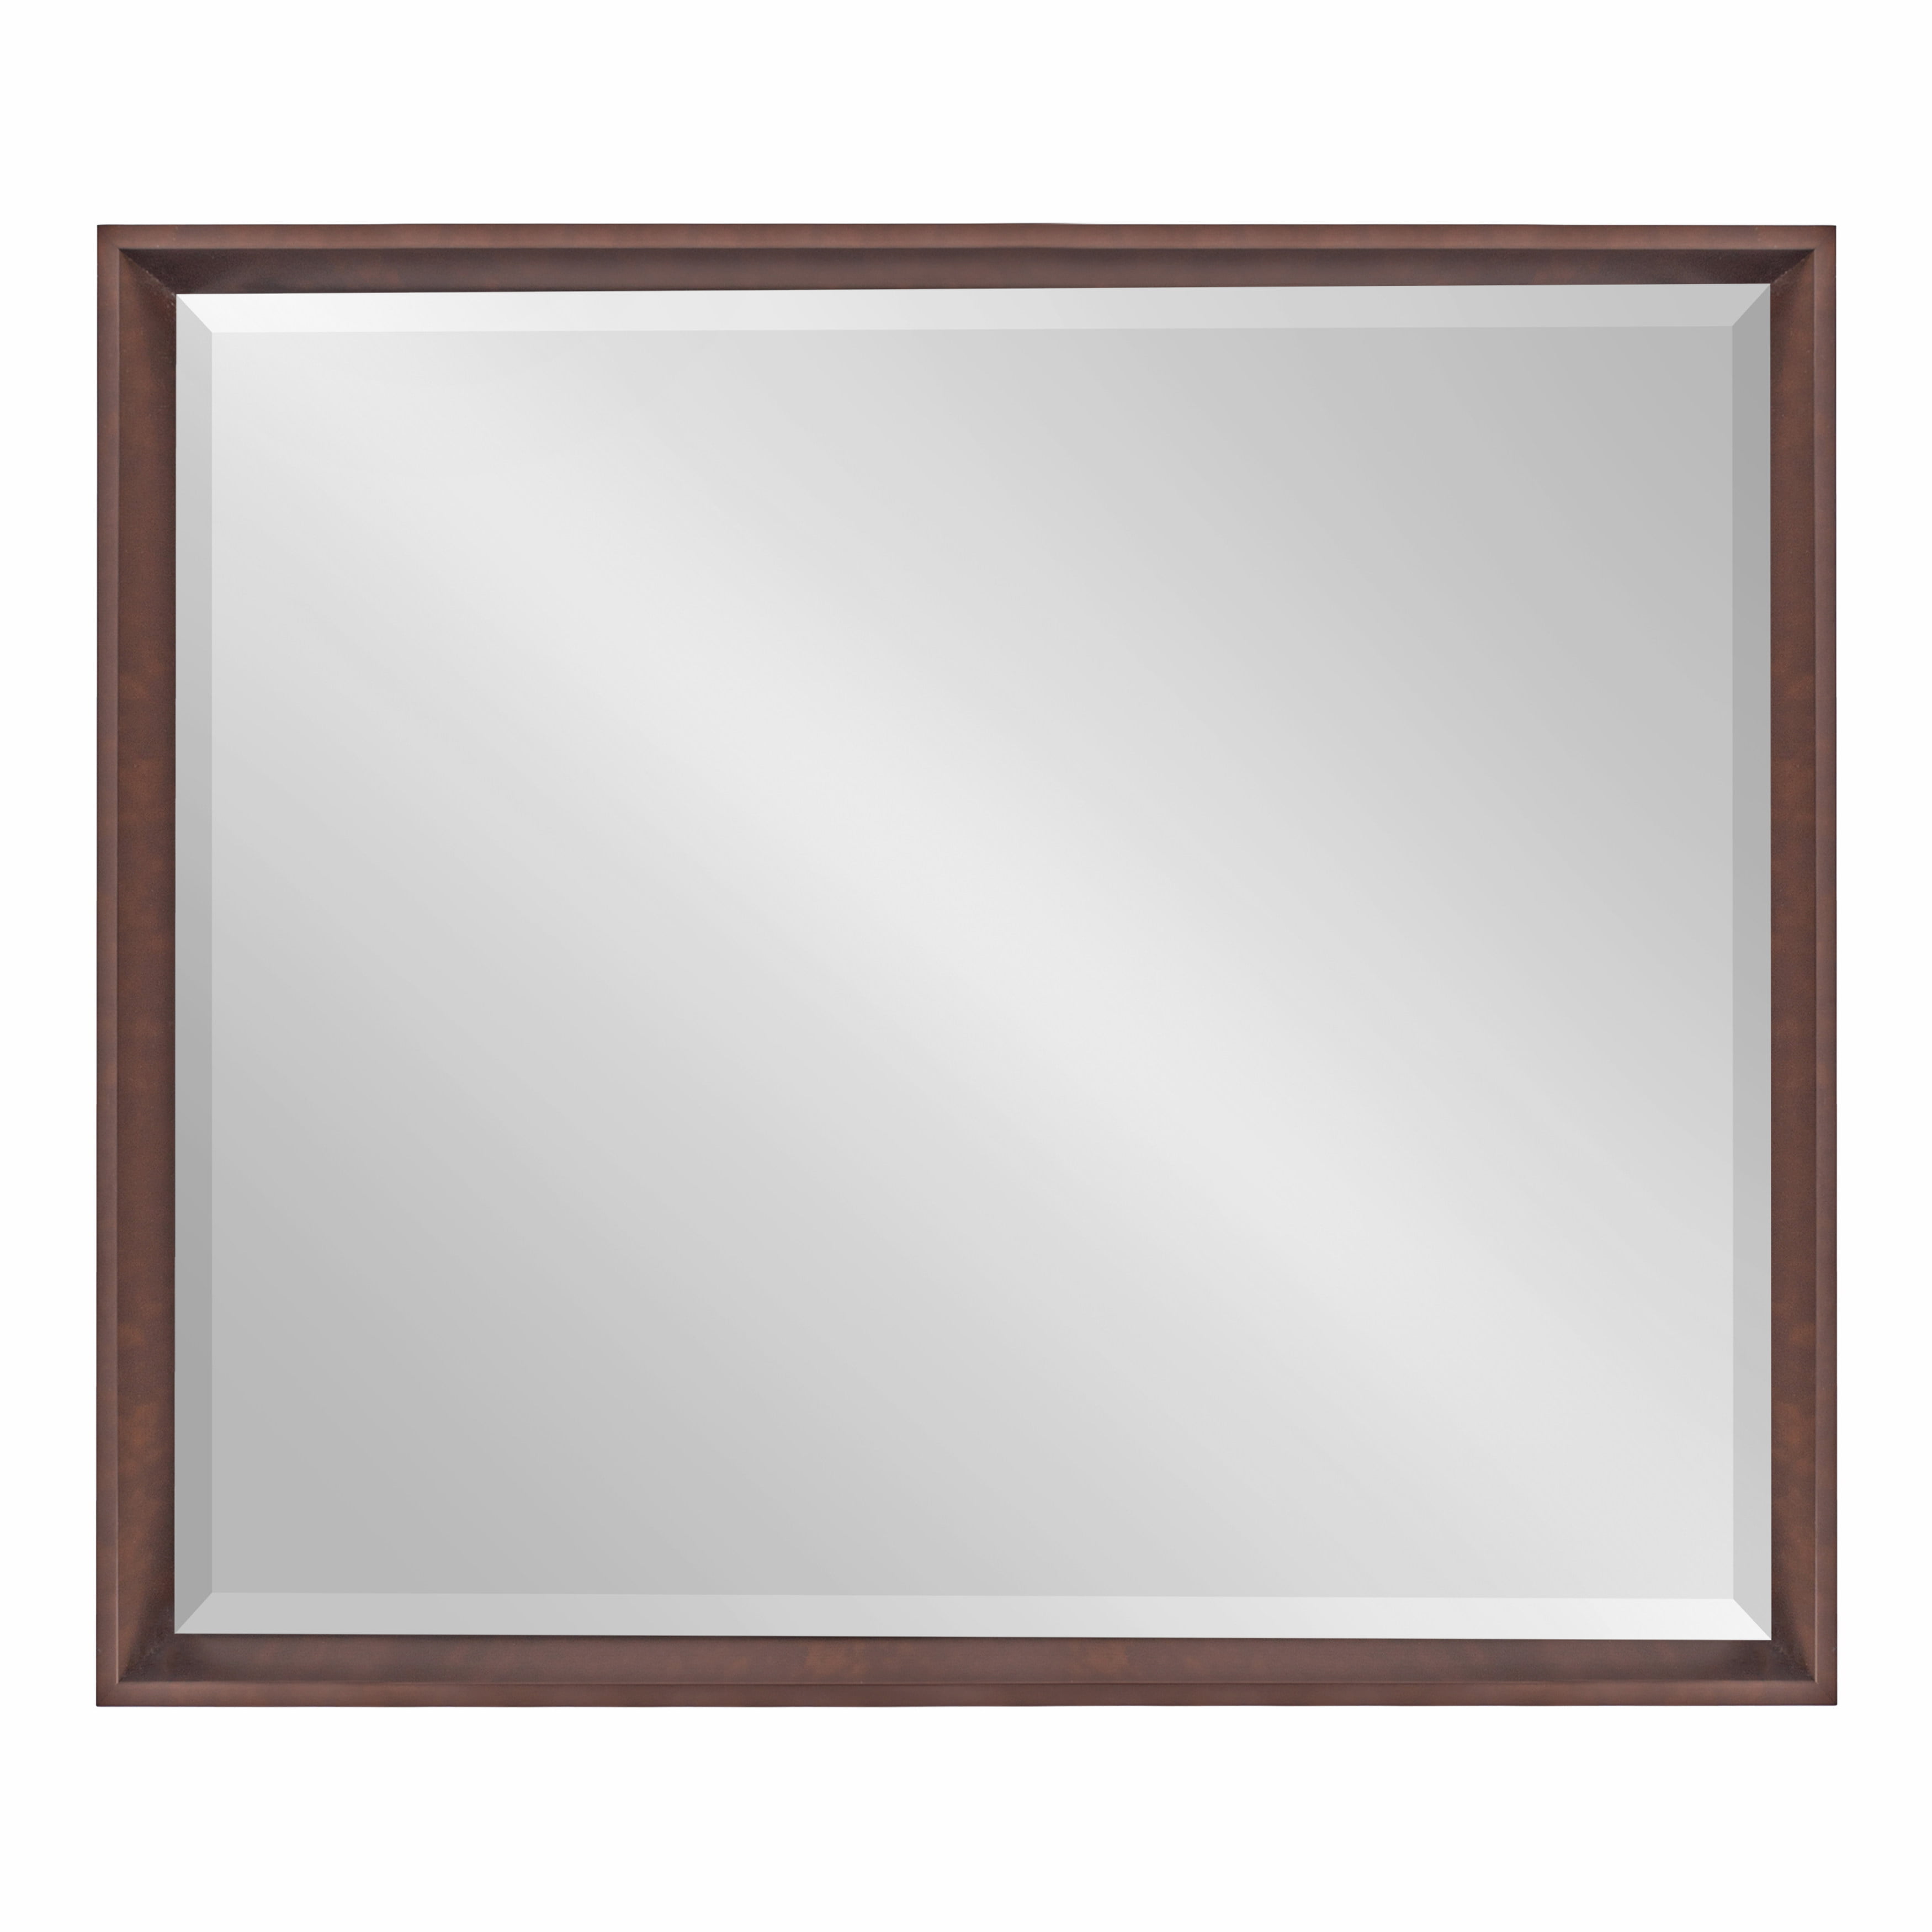 Kate and Laurel Calter Modern Framed Wall Mirror, 23.5 x 29.5, Bronze, Decorative  Mirror for Wall